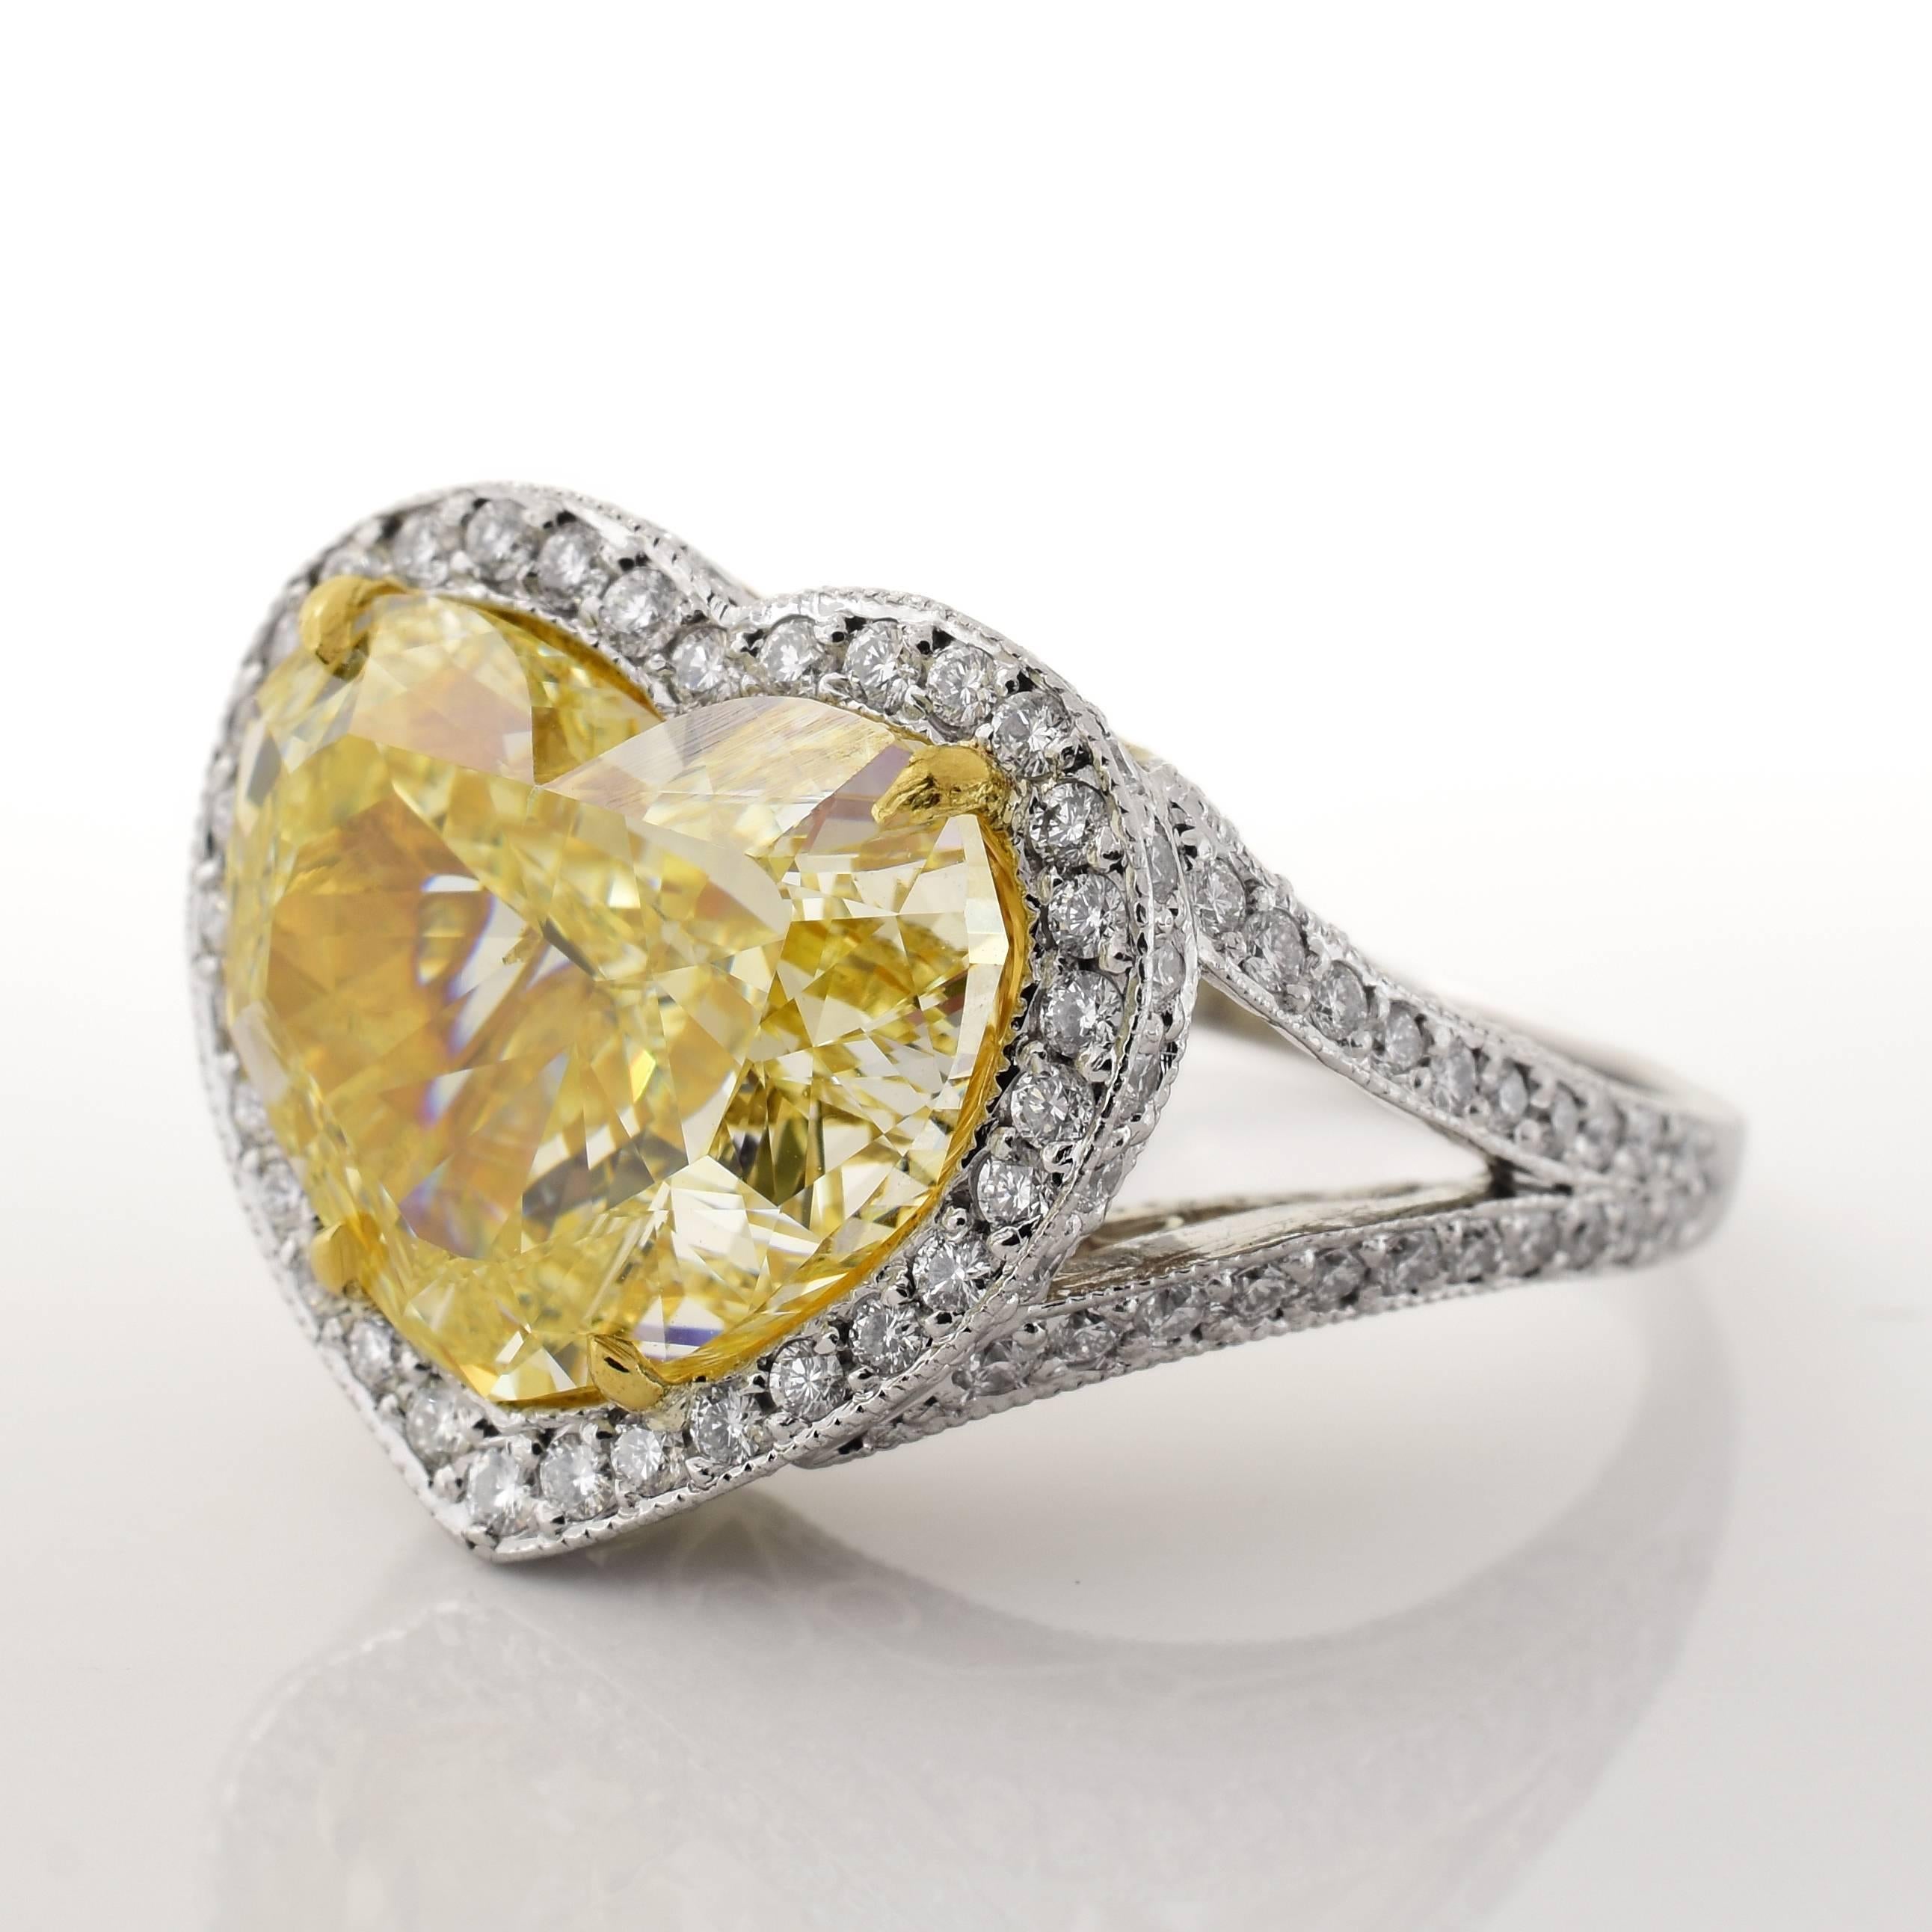 This ring features a 7.12 carat SI1 fancy yellow heart shaped diamond center stone. The heart is surrounded in white accent diamonds, with prongs and details in yellow gold, with the rest in platinum. The ring is a size 6.25 US.